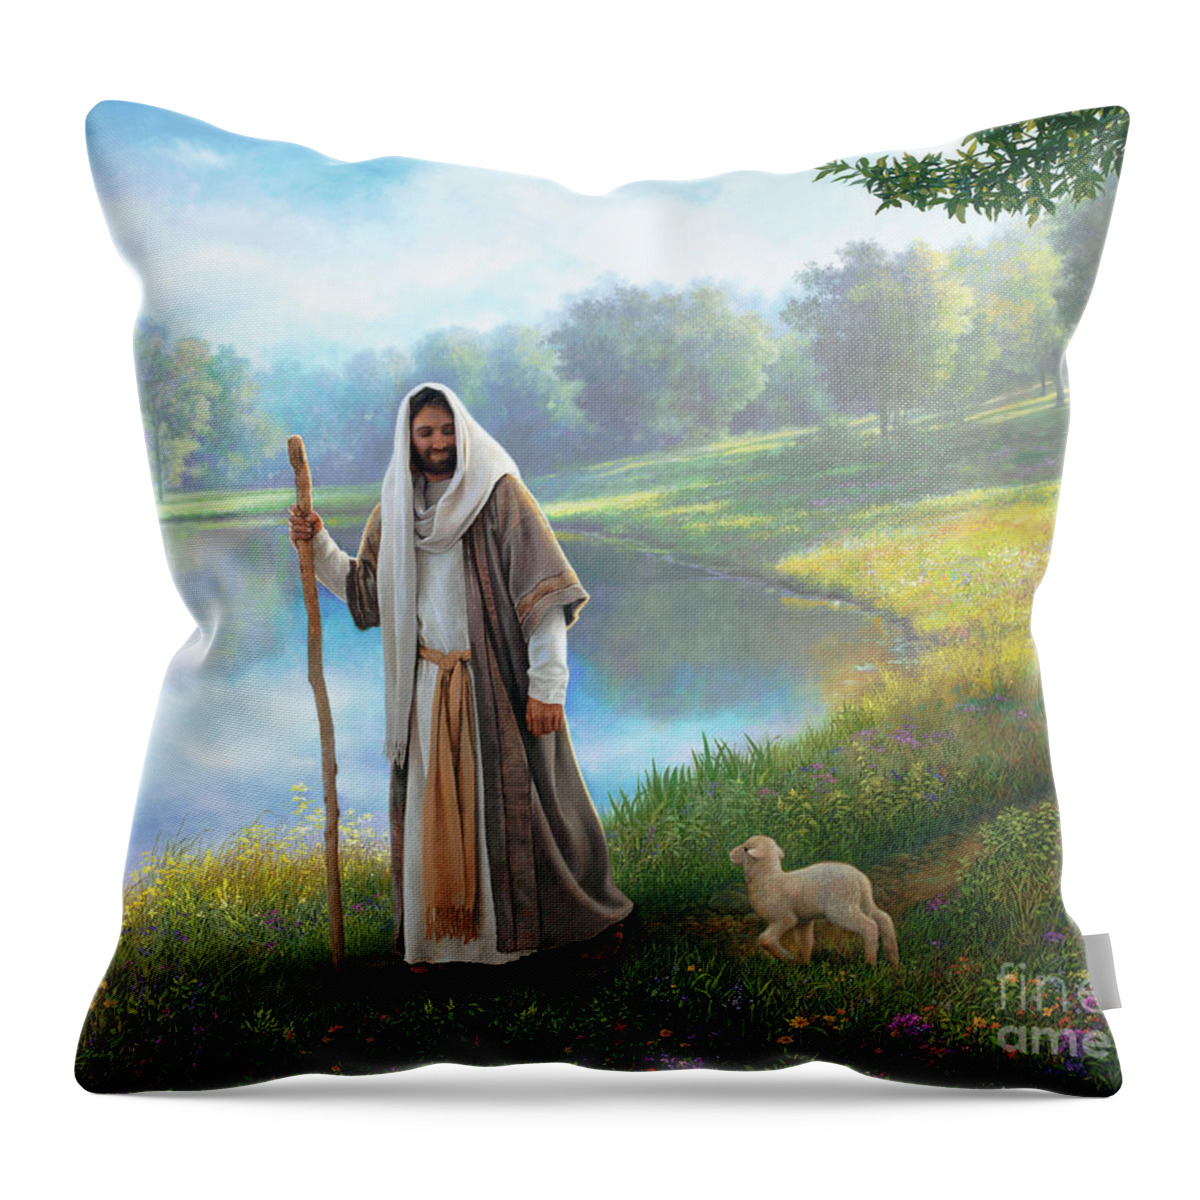 Jesus Throw Pillow featuring the painting Little Lamb by Greg Olsen